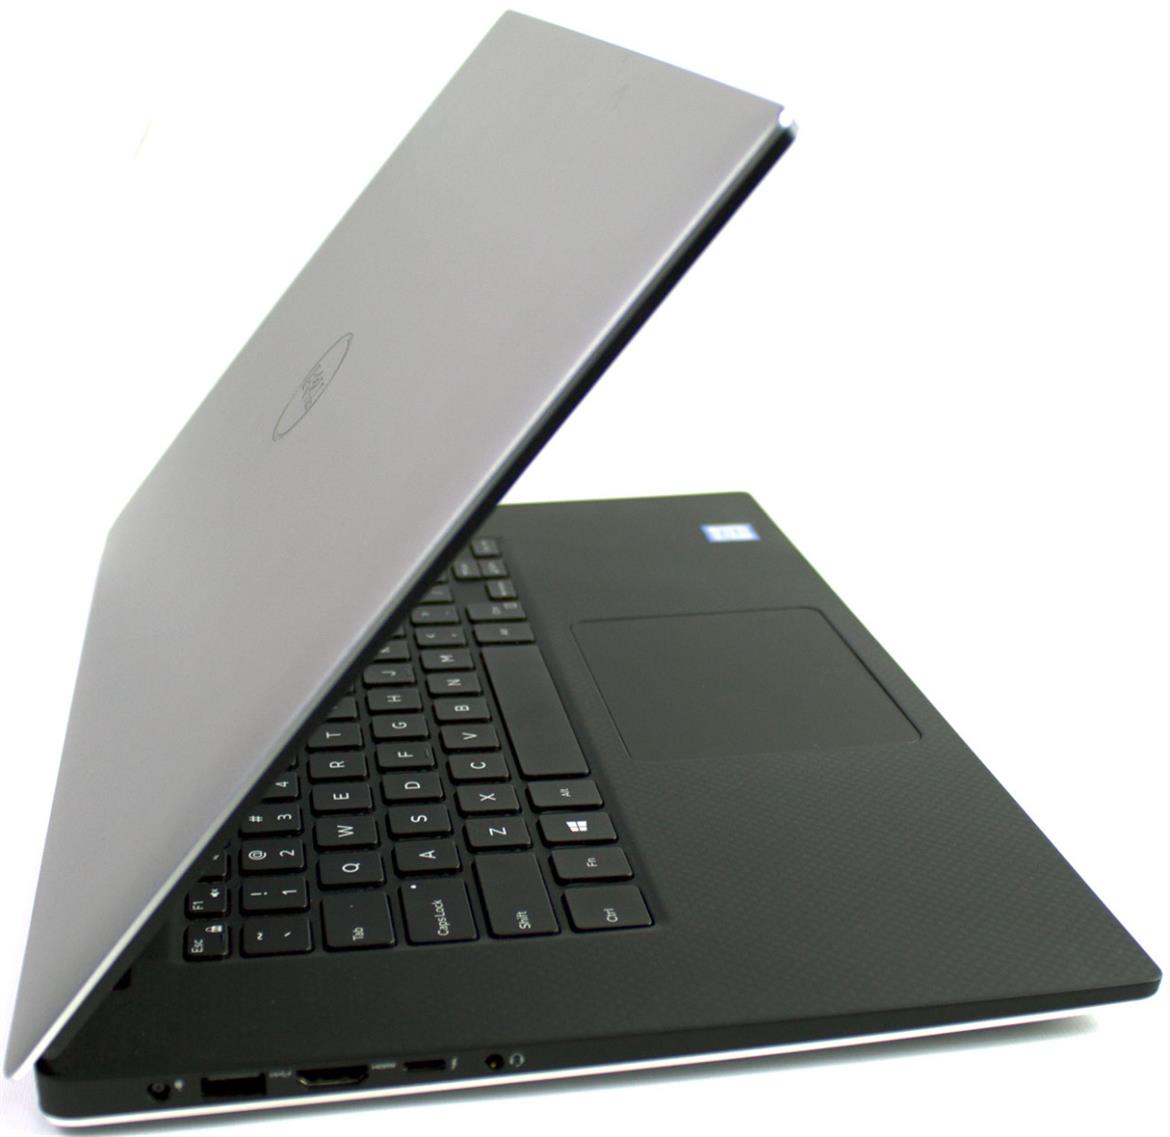 Dell Precision 15 5000 Series Mobile Workstation Review: Pro Power And Style